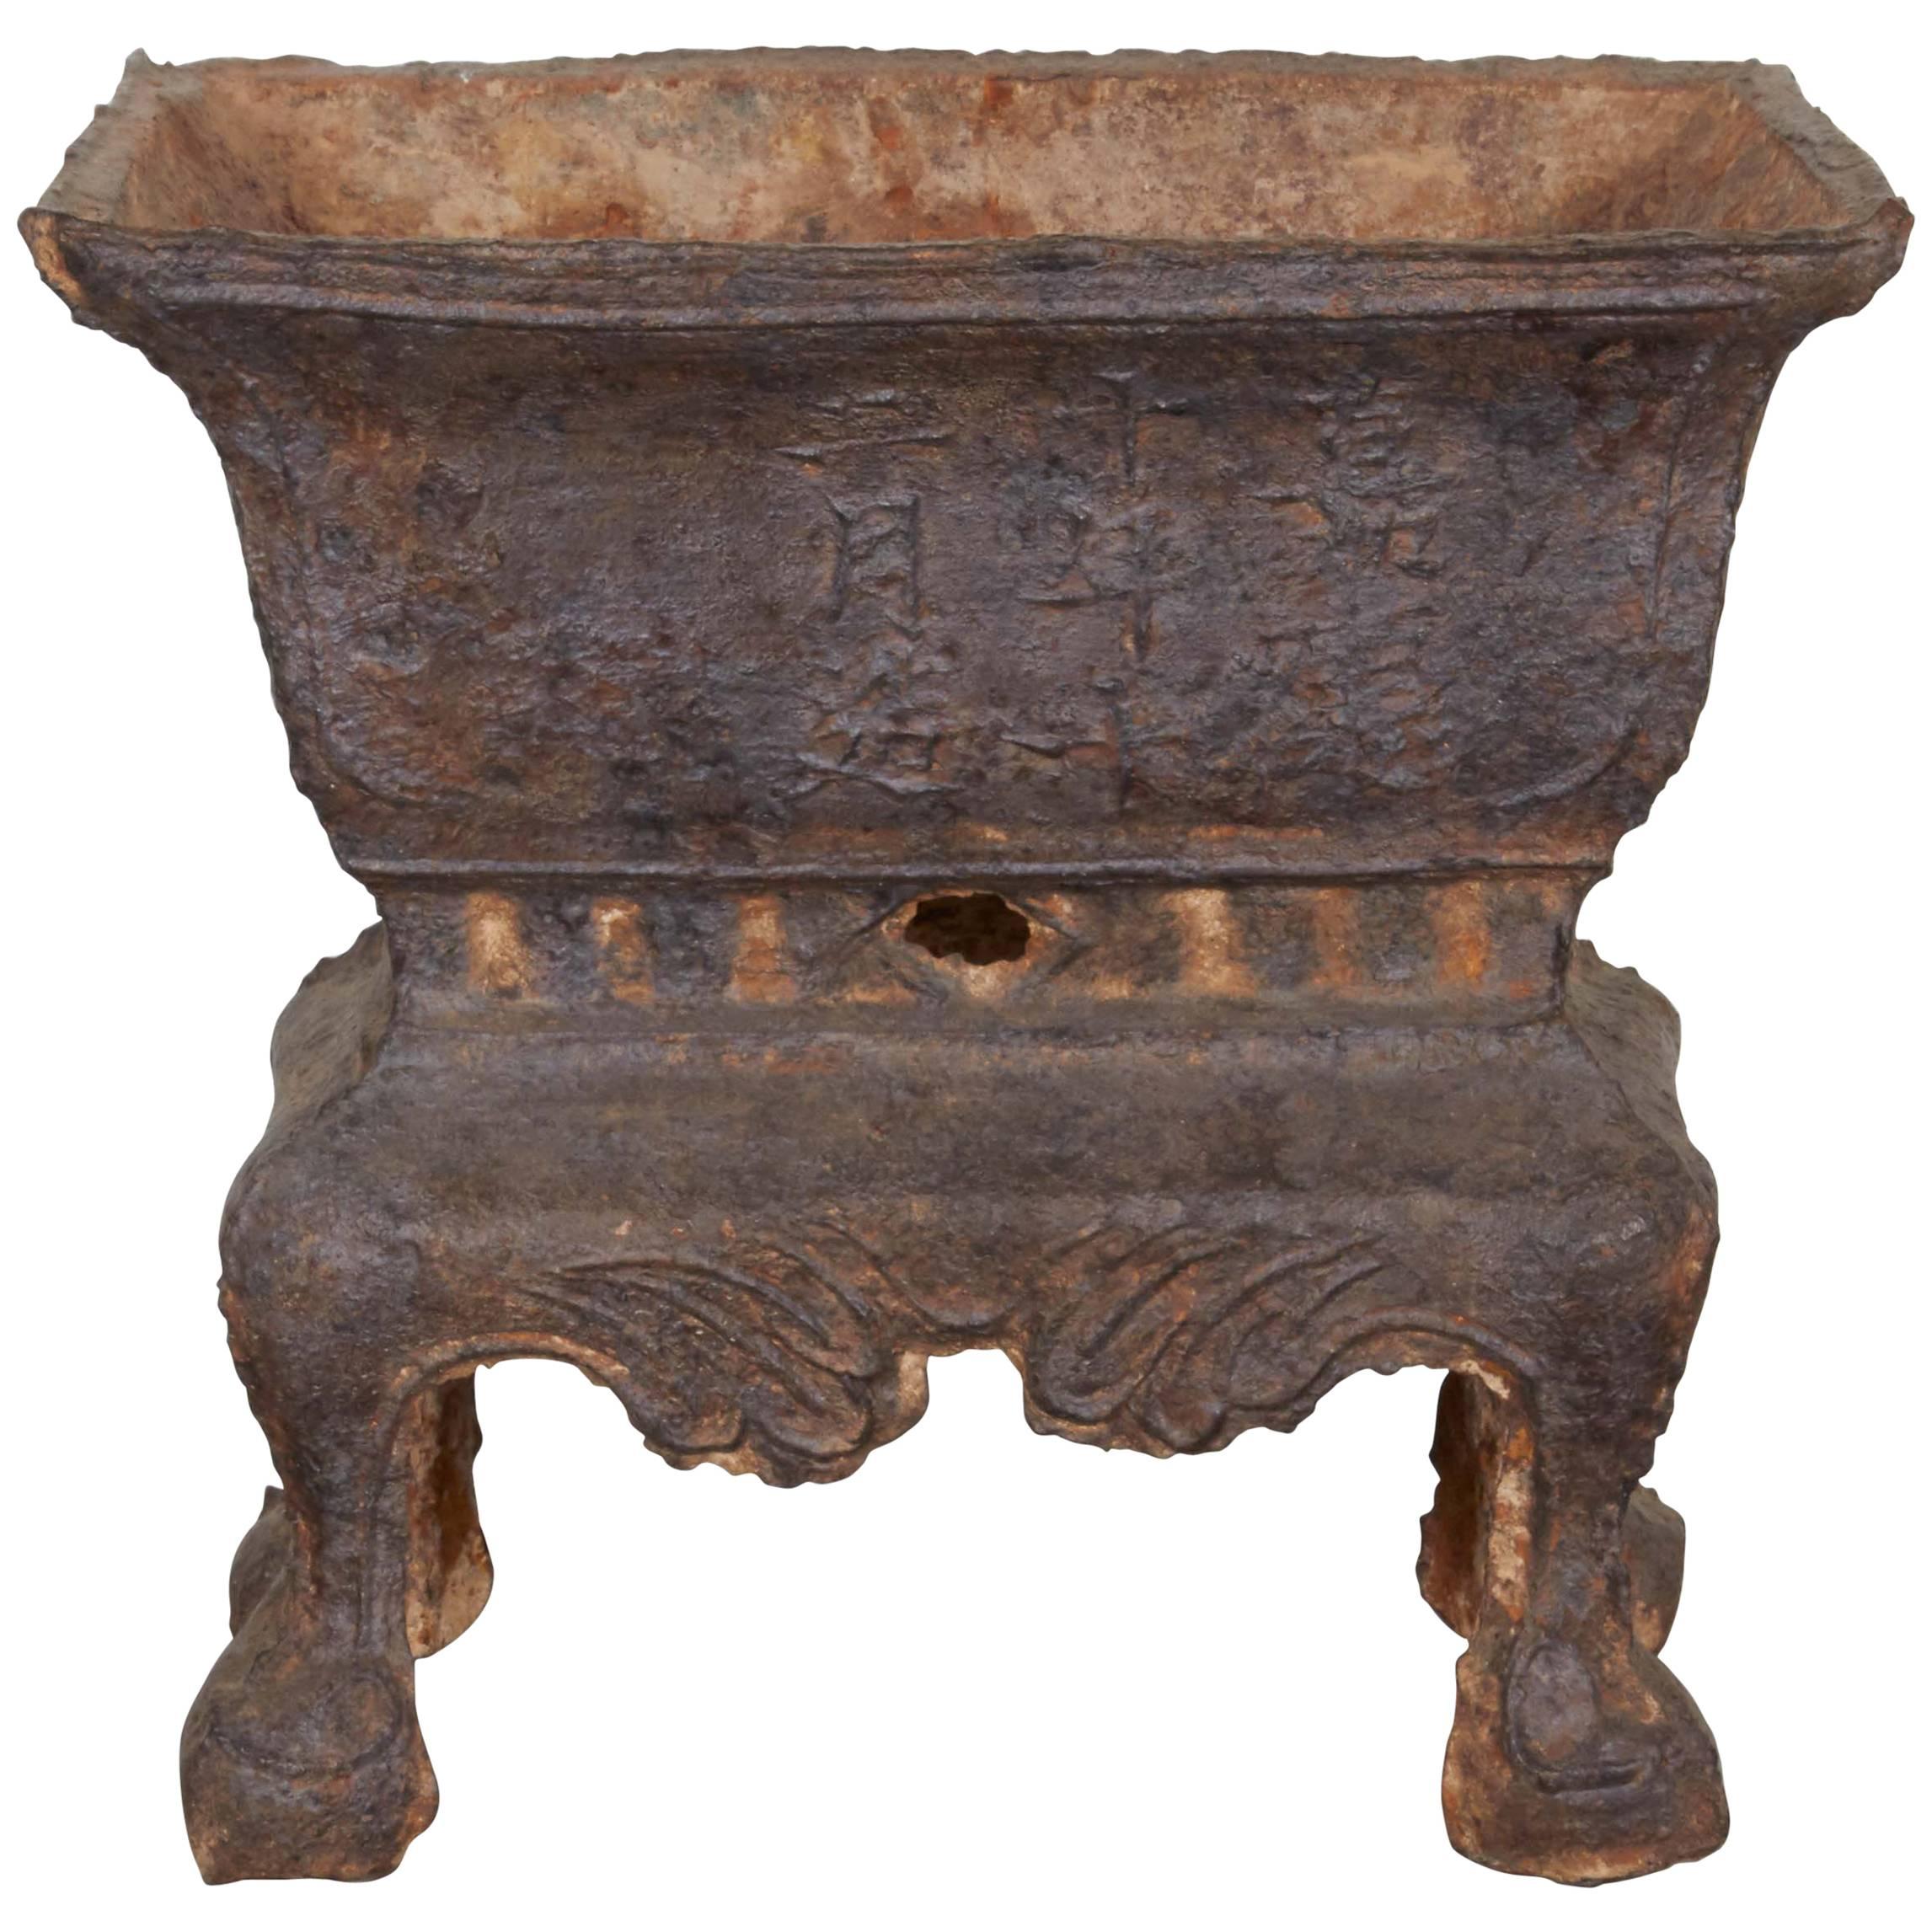 Early 19th Century Cast Iron Incense Burner